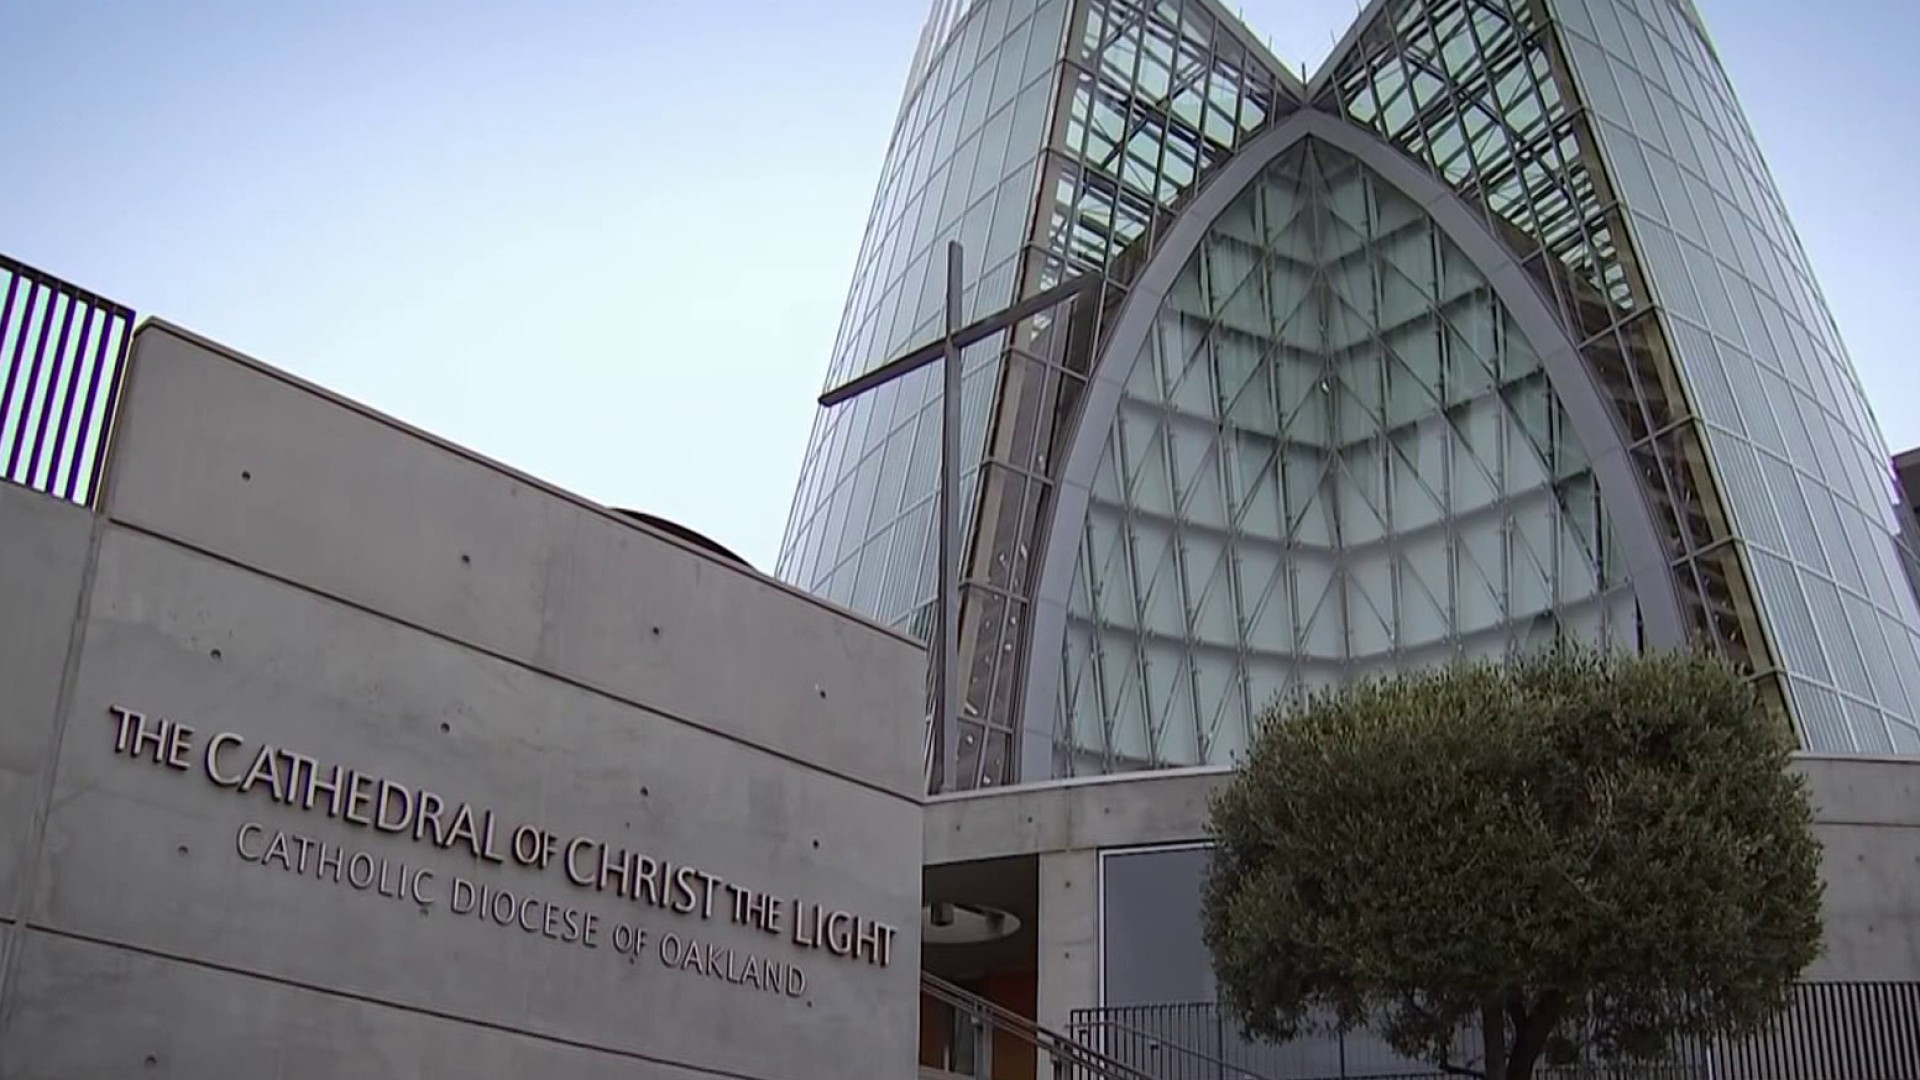 Oakland Cathedral Employee Arrested For Allegedly Possessing, Sharing Child Porn